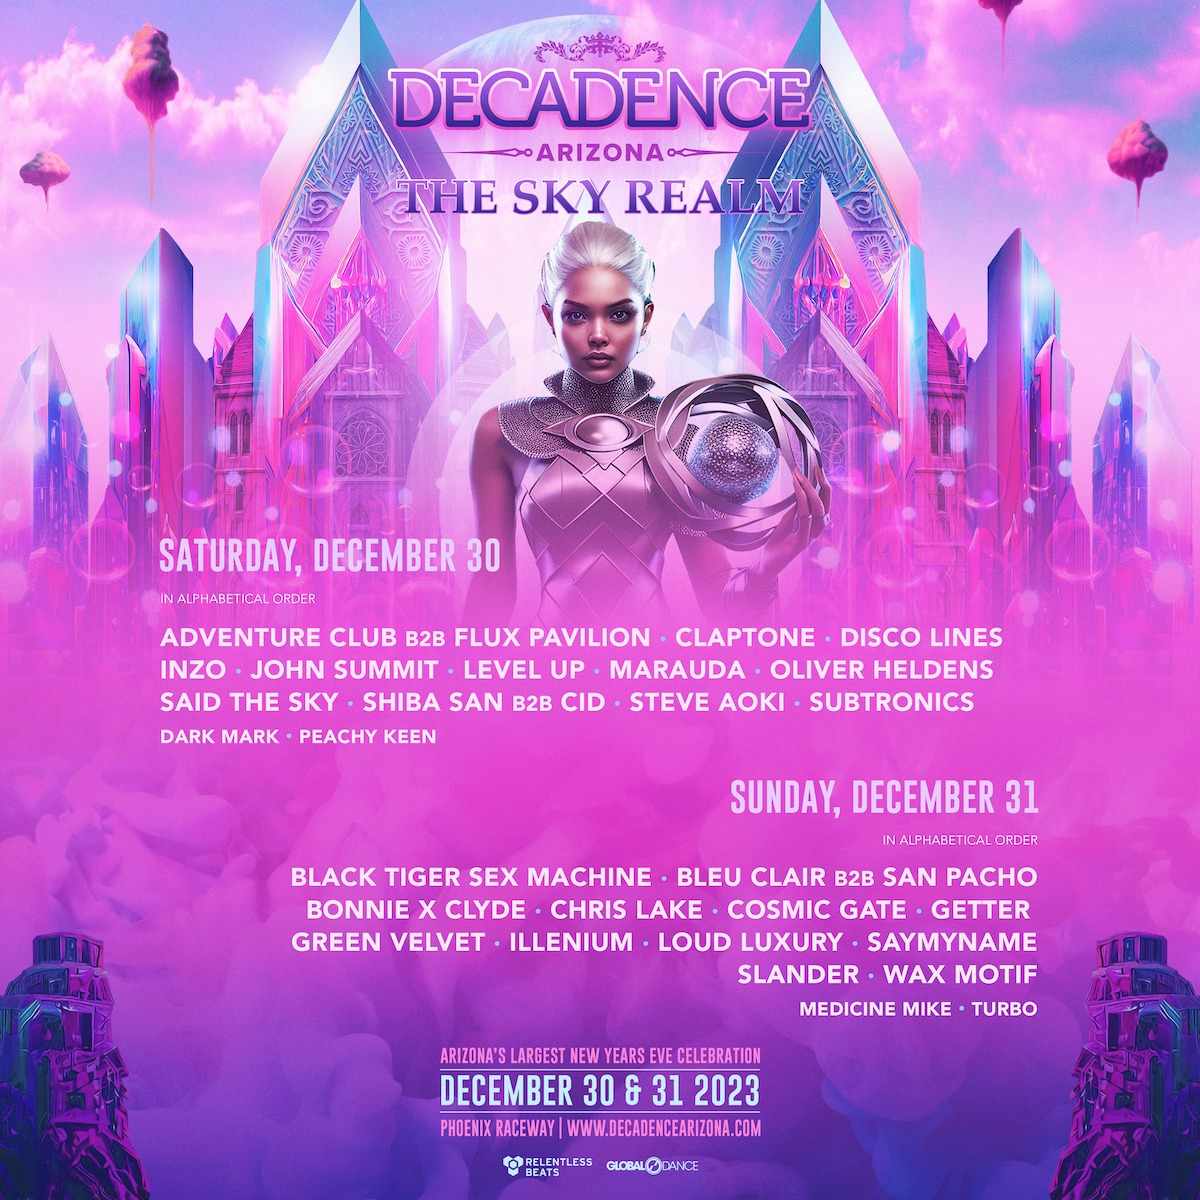 Decadence Arizona Announces Final 2023 Lineup Additions and Day Splits